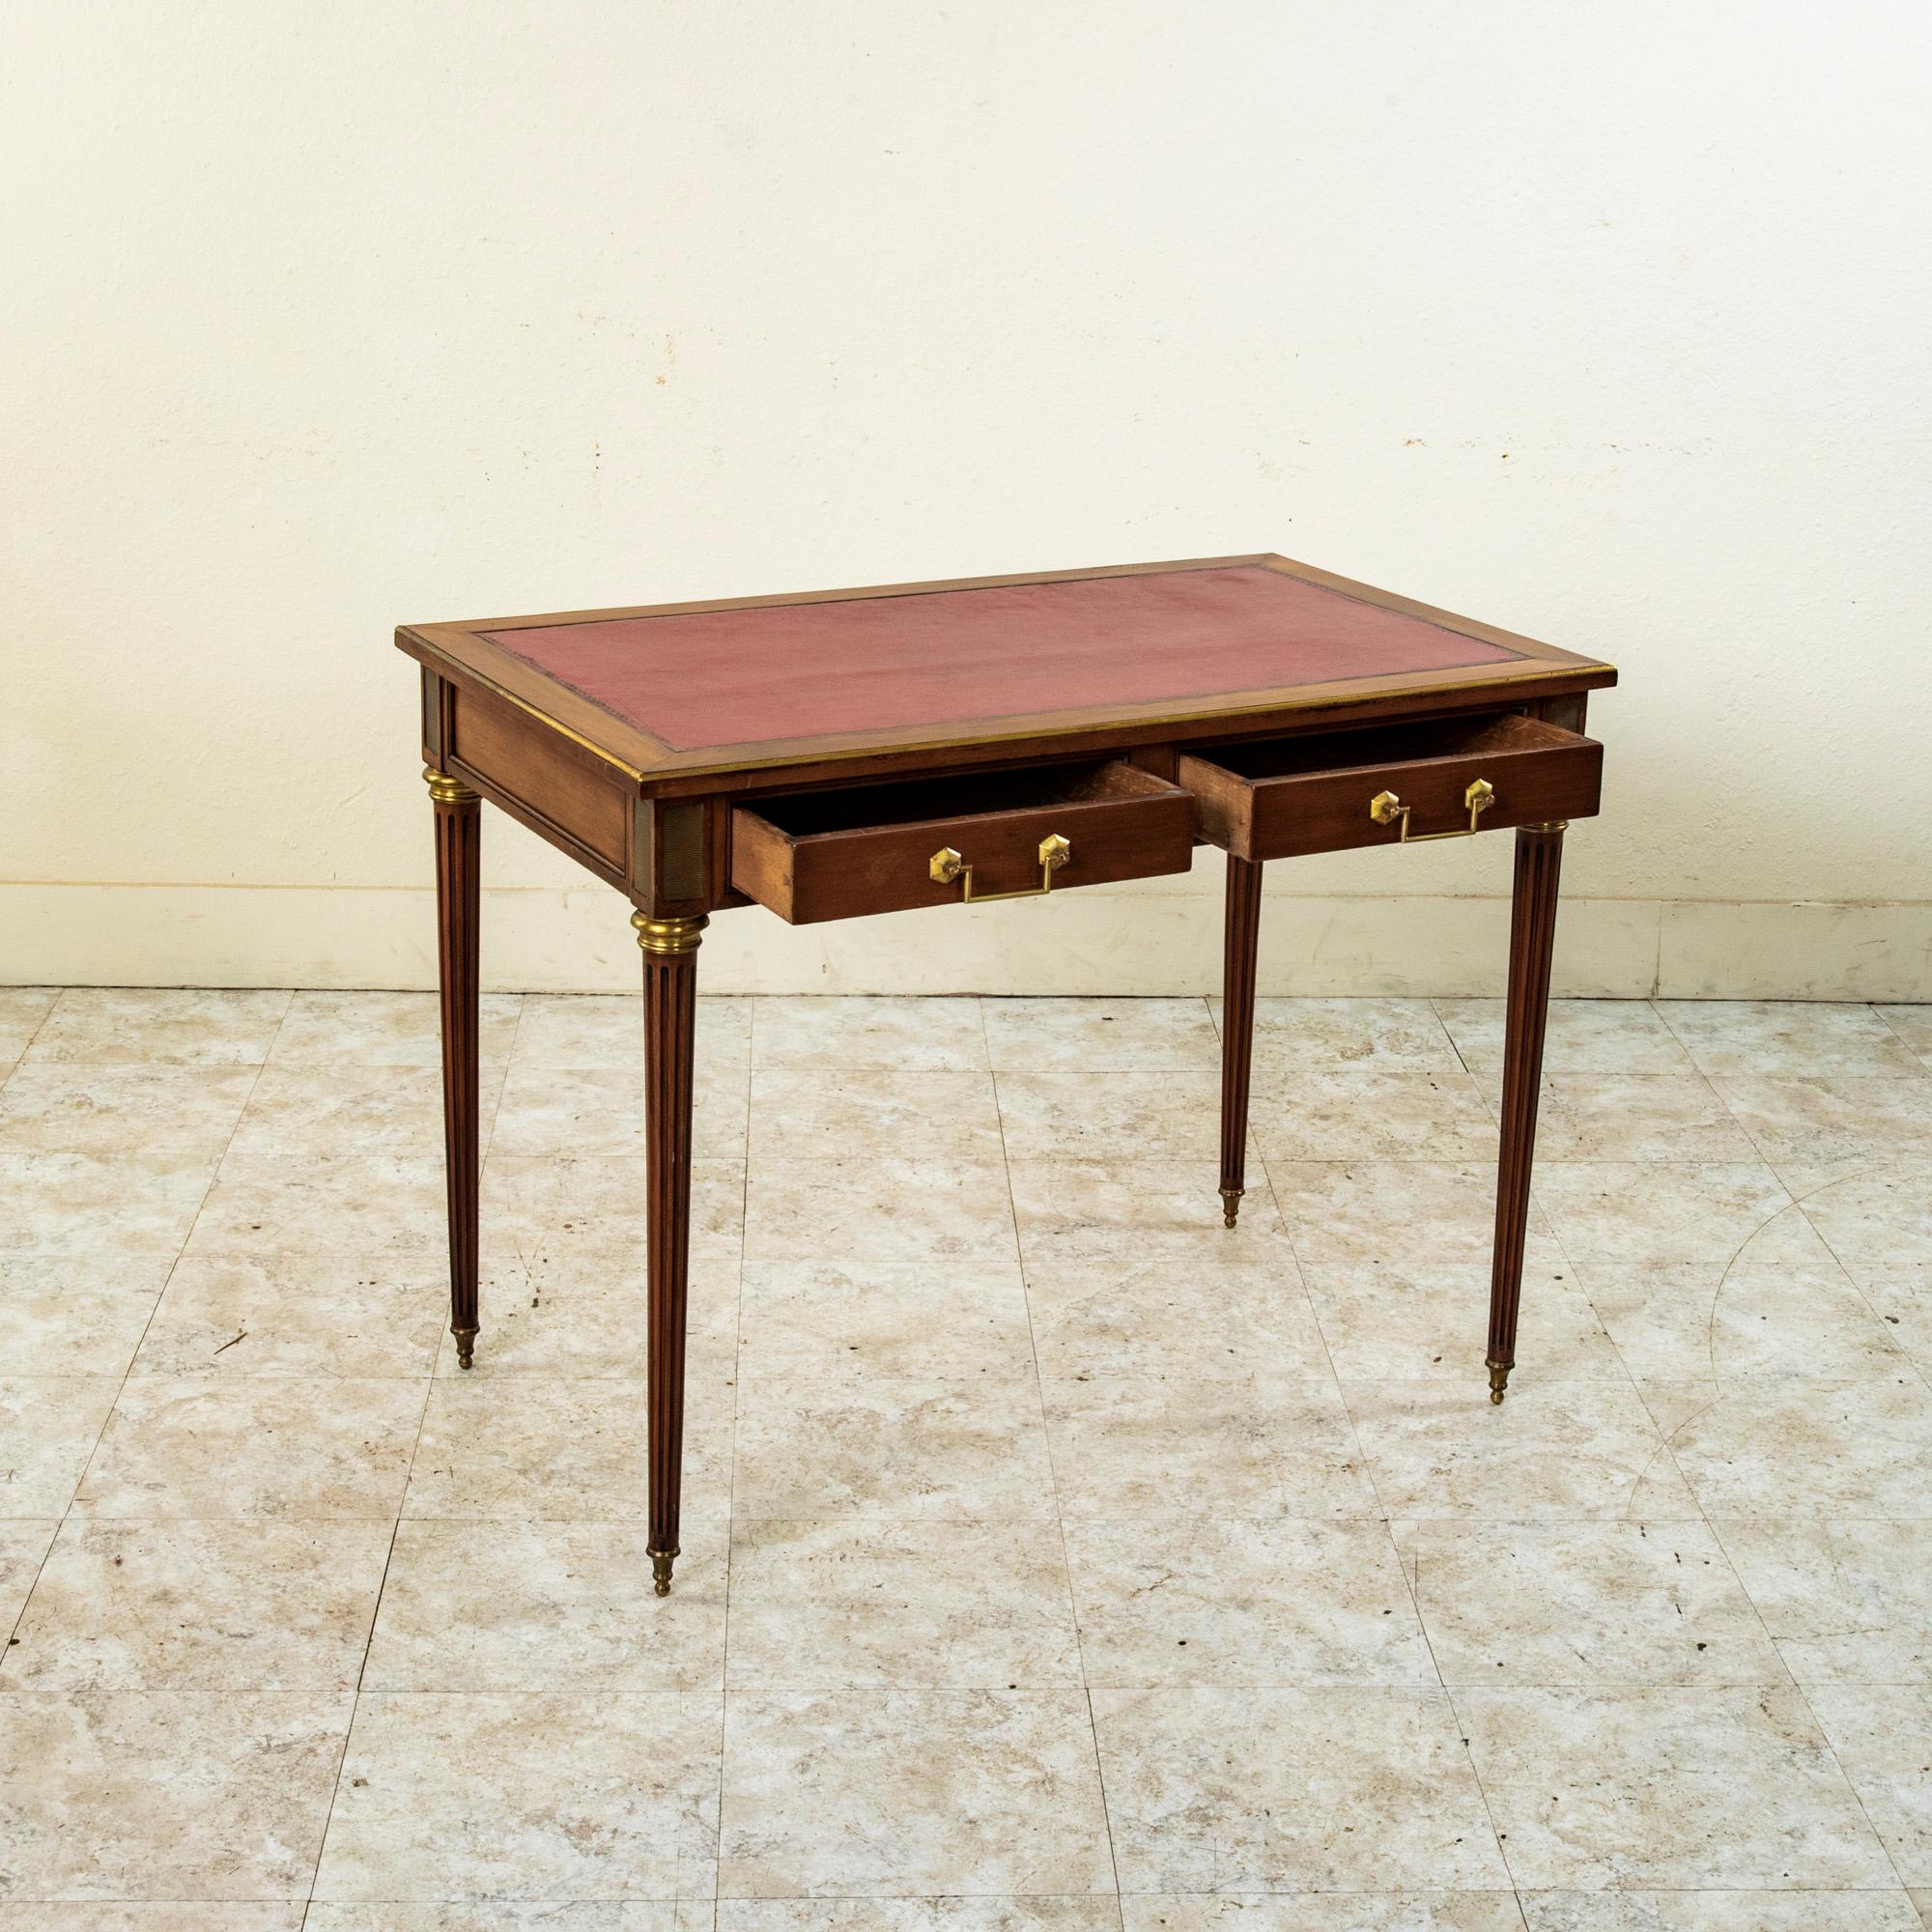 19th Century French Louis XVI Style Mahogany Desk, Writing Table, Leather Top For Sale 4